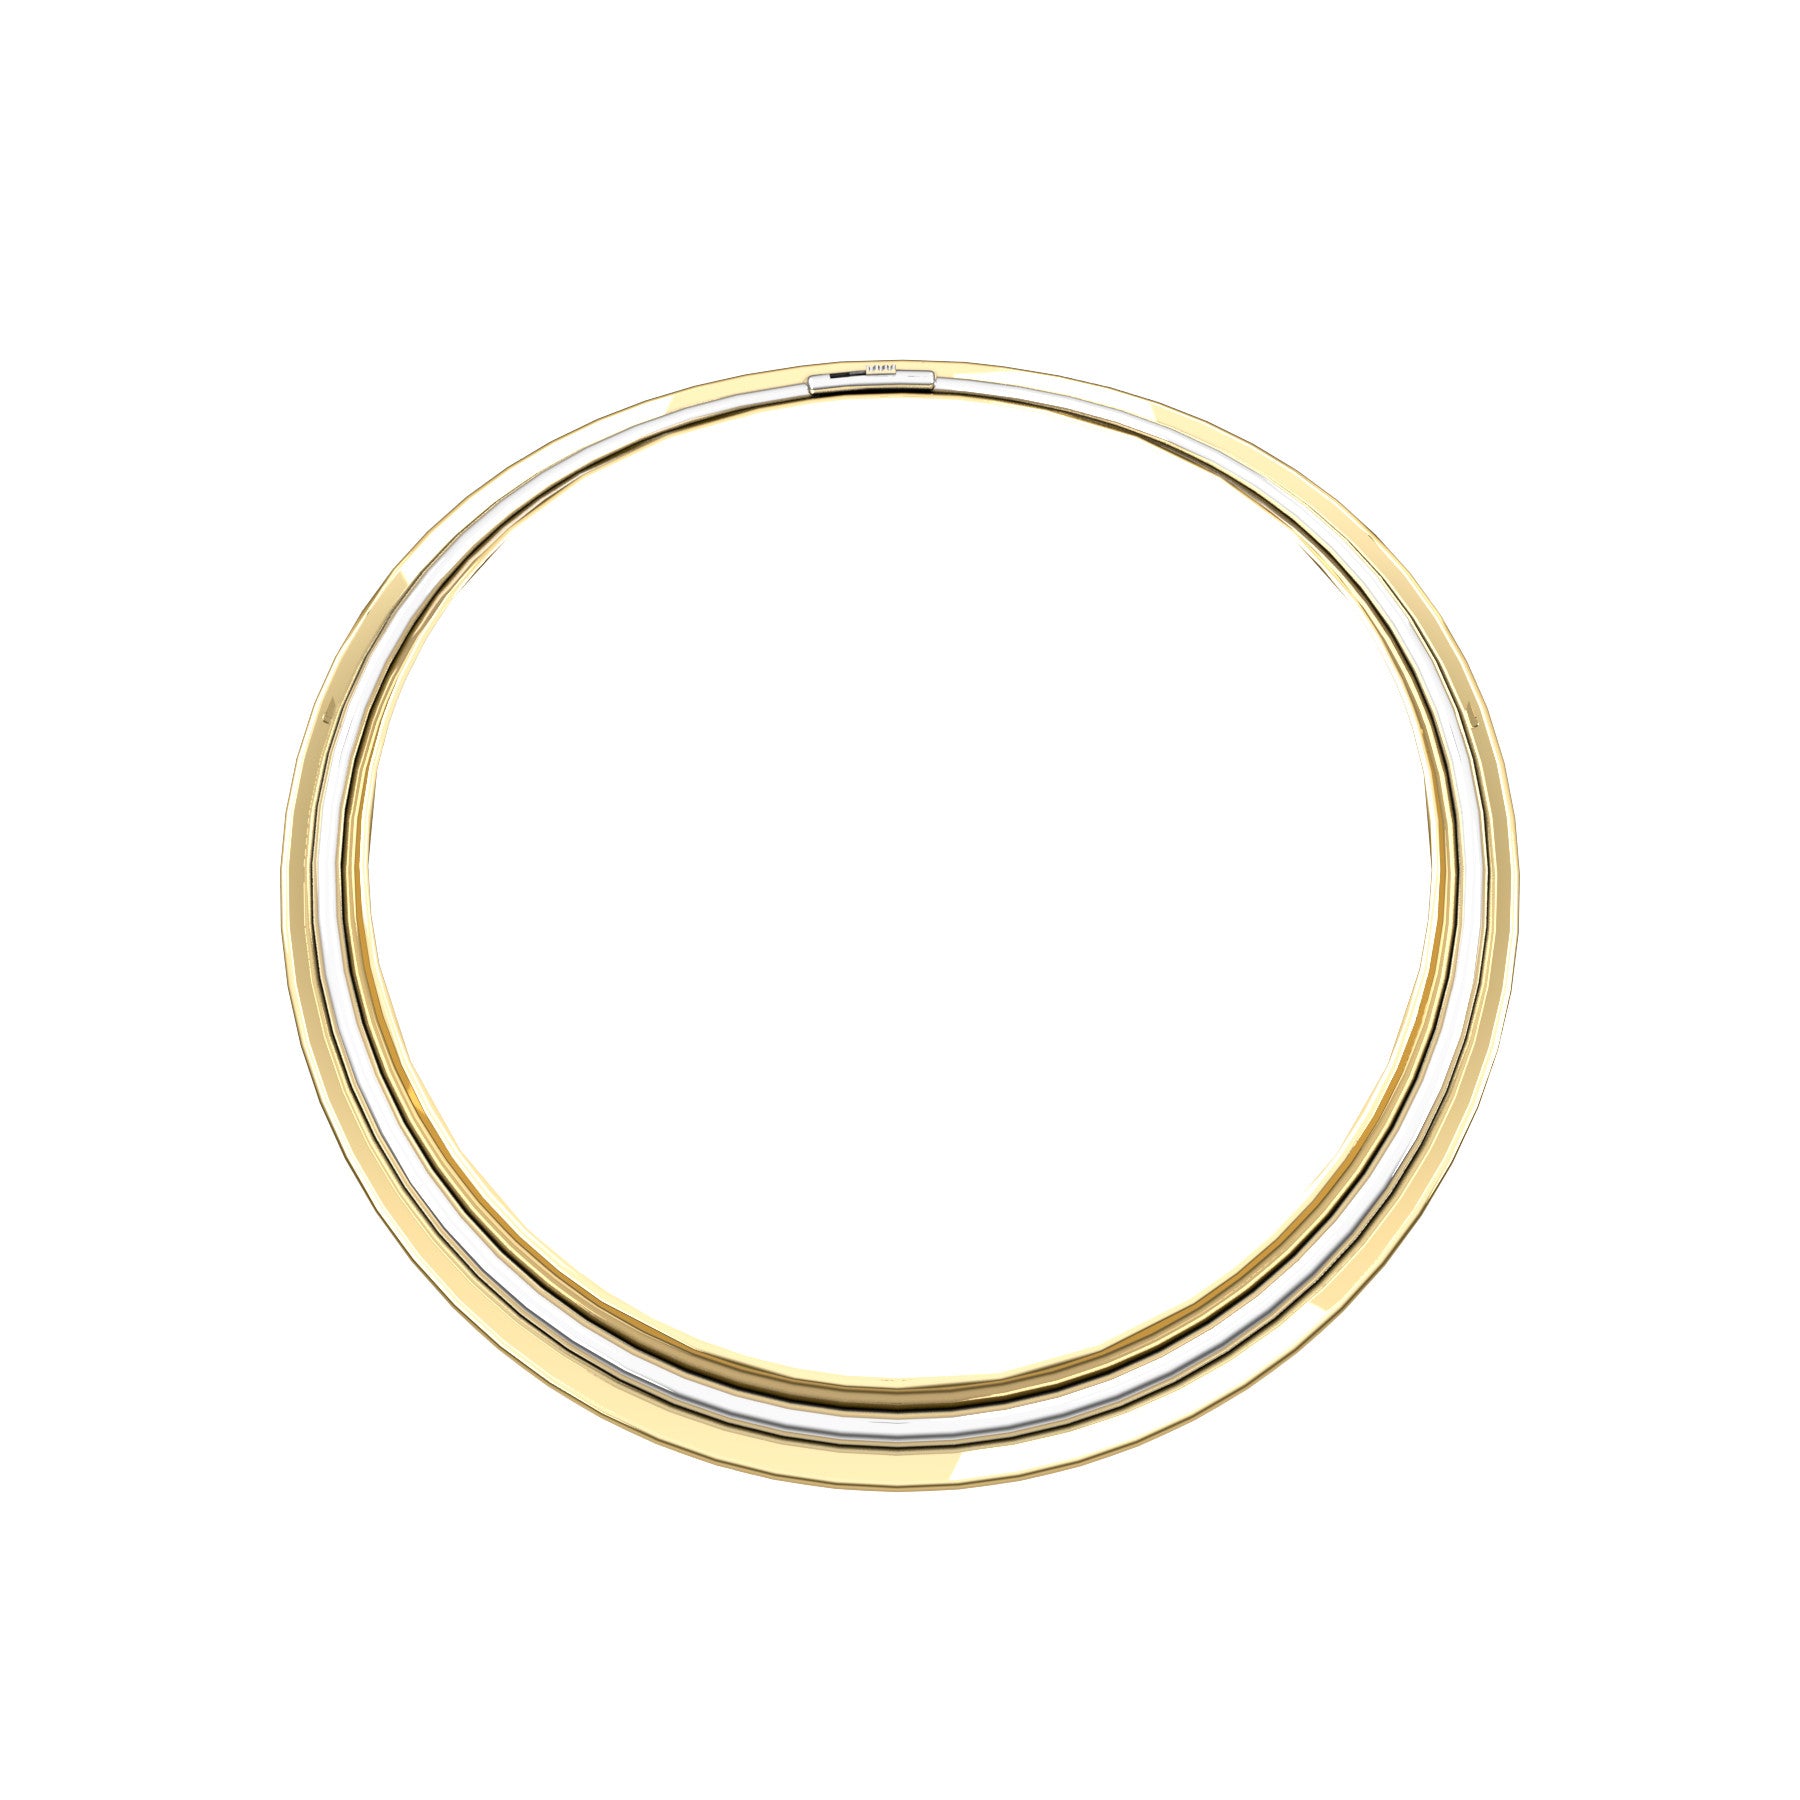 bobo rigid necklace, 18 K yellow gold, weight about 88 to 96 g. (3.03 to 3.38 oz) width 13,7 mm max